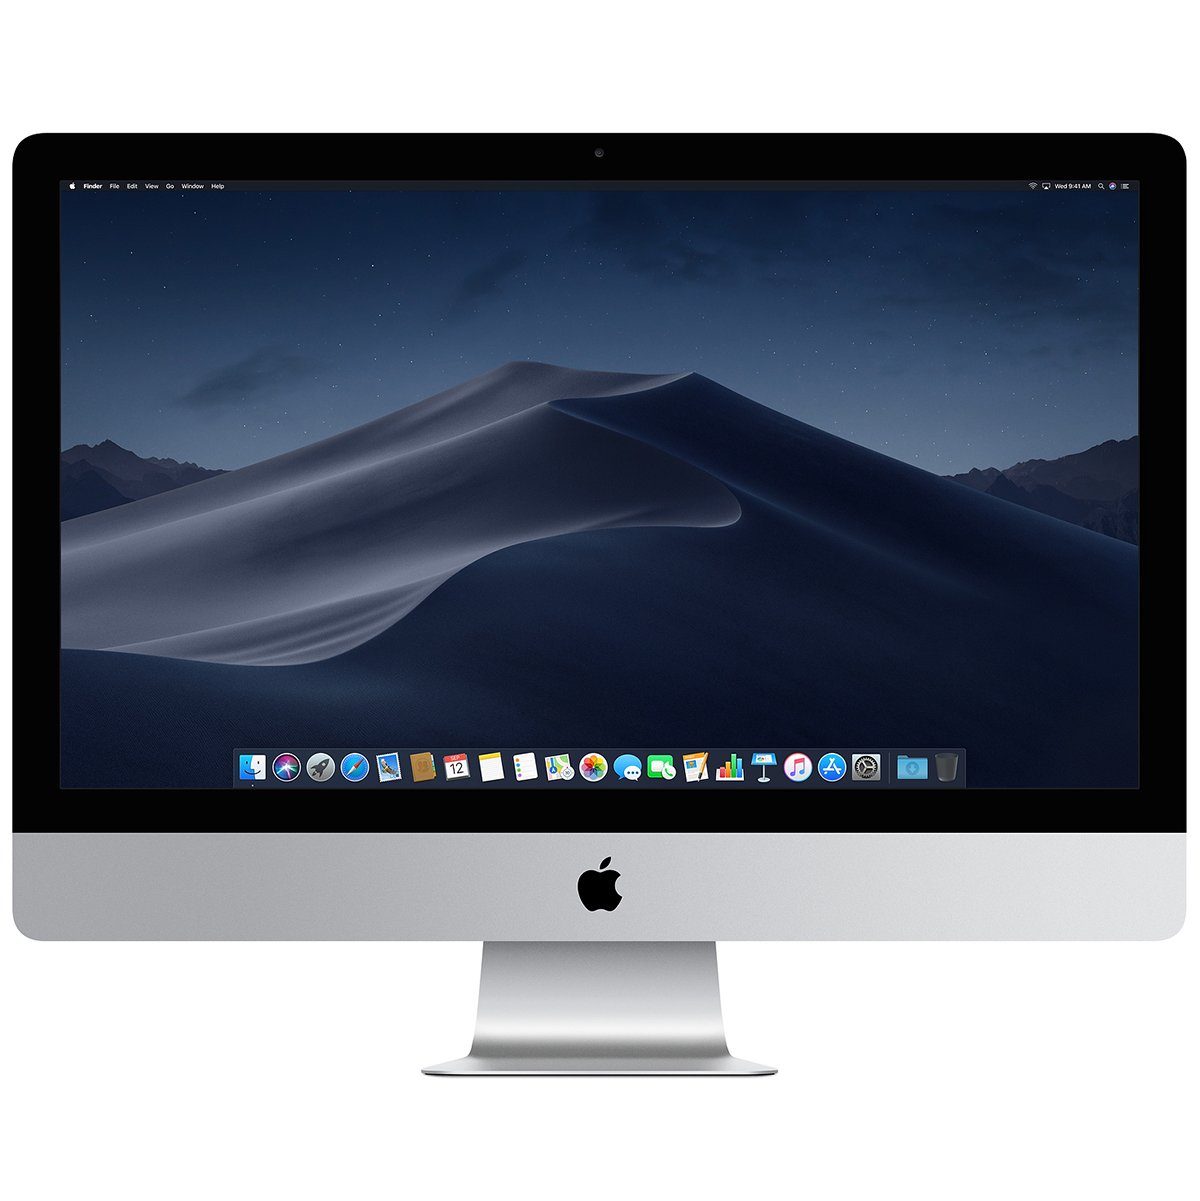 Apple iMac 27* 3.1GHz 6-core Intel Core i5, Turbo Boost up to 4.3GHz/8GB/1 TB 